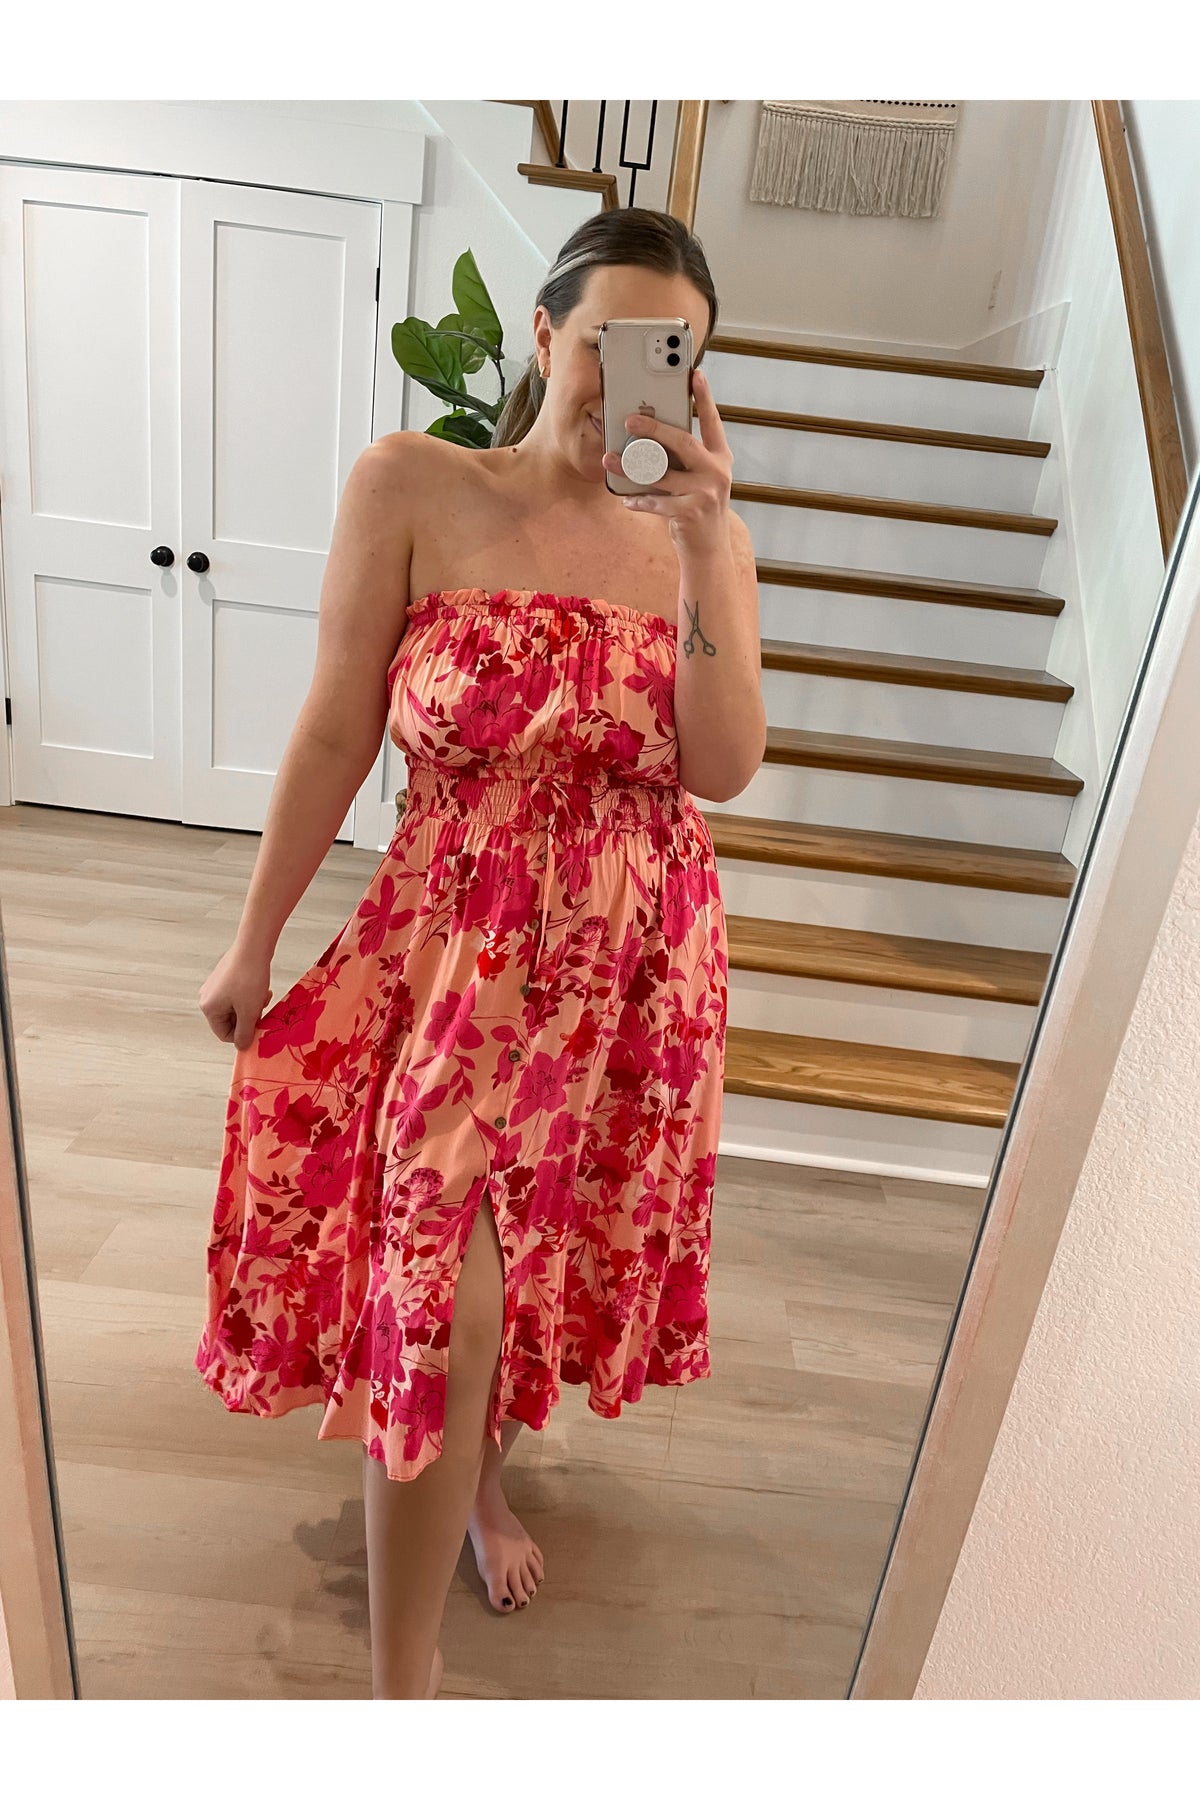 Lovers Way Floral Strapless Midi Dress